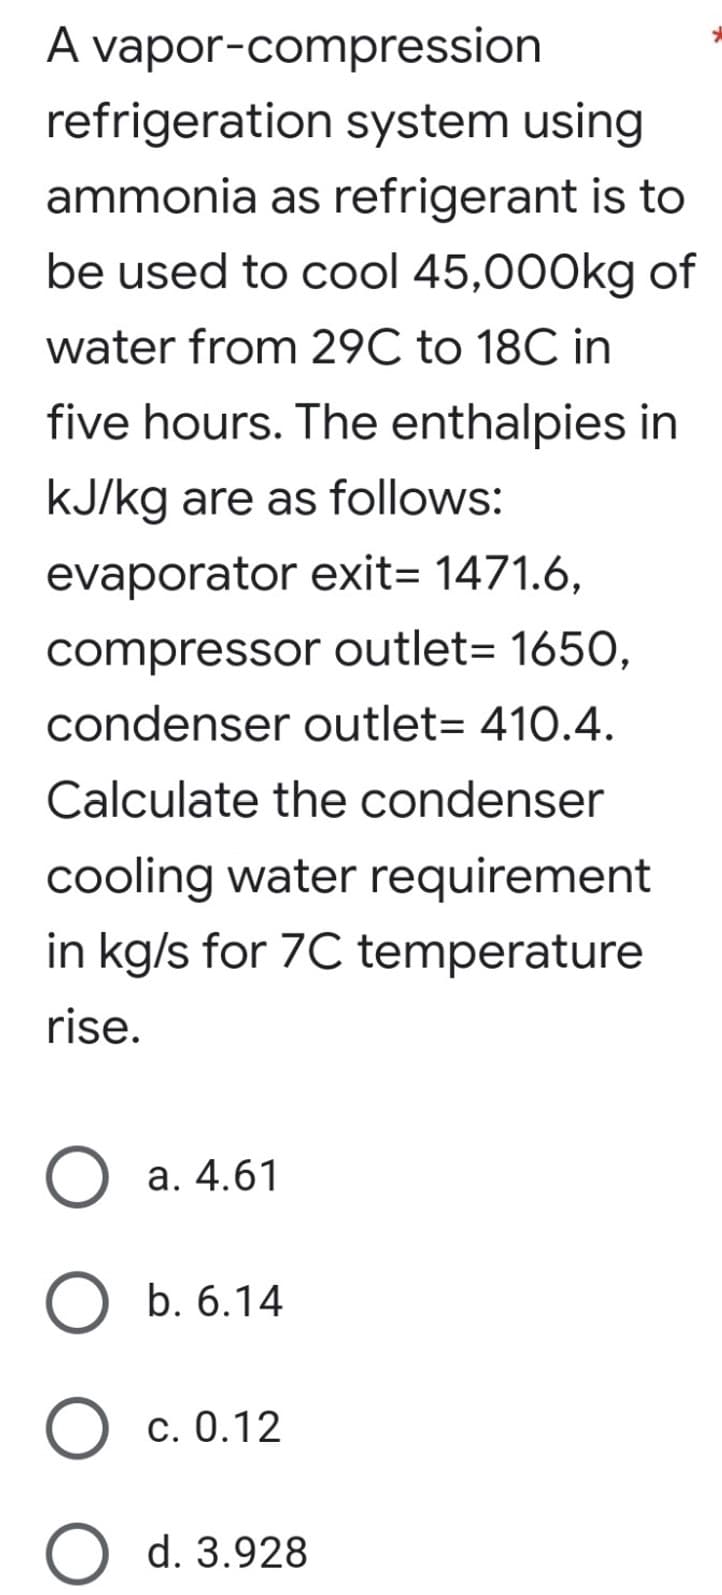 A vapor-compression
refrigeration system using
ammonia as refrigerant is to
be used to cool 45,000kg of
water from 29C to 18C in
five hours. The enthalpies in
kJ/kg are as follows:
evaporator exit= 1471.6,
compressor outlet= 1650,
condenser outlet= 410.4.
Calculate the condenser
cooling water requirement
in kg/s for 7C temperature
rise.
a. 4.61
b. 6.14
c. 0.12
O d. 3.928
